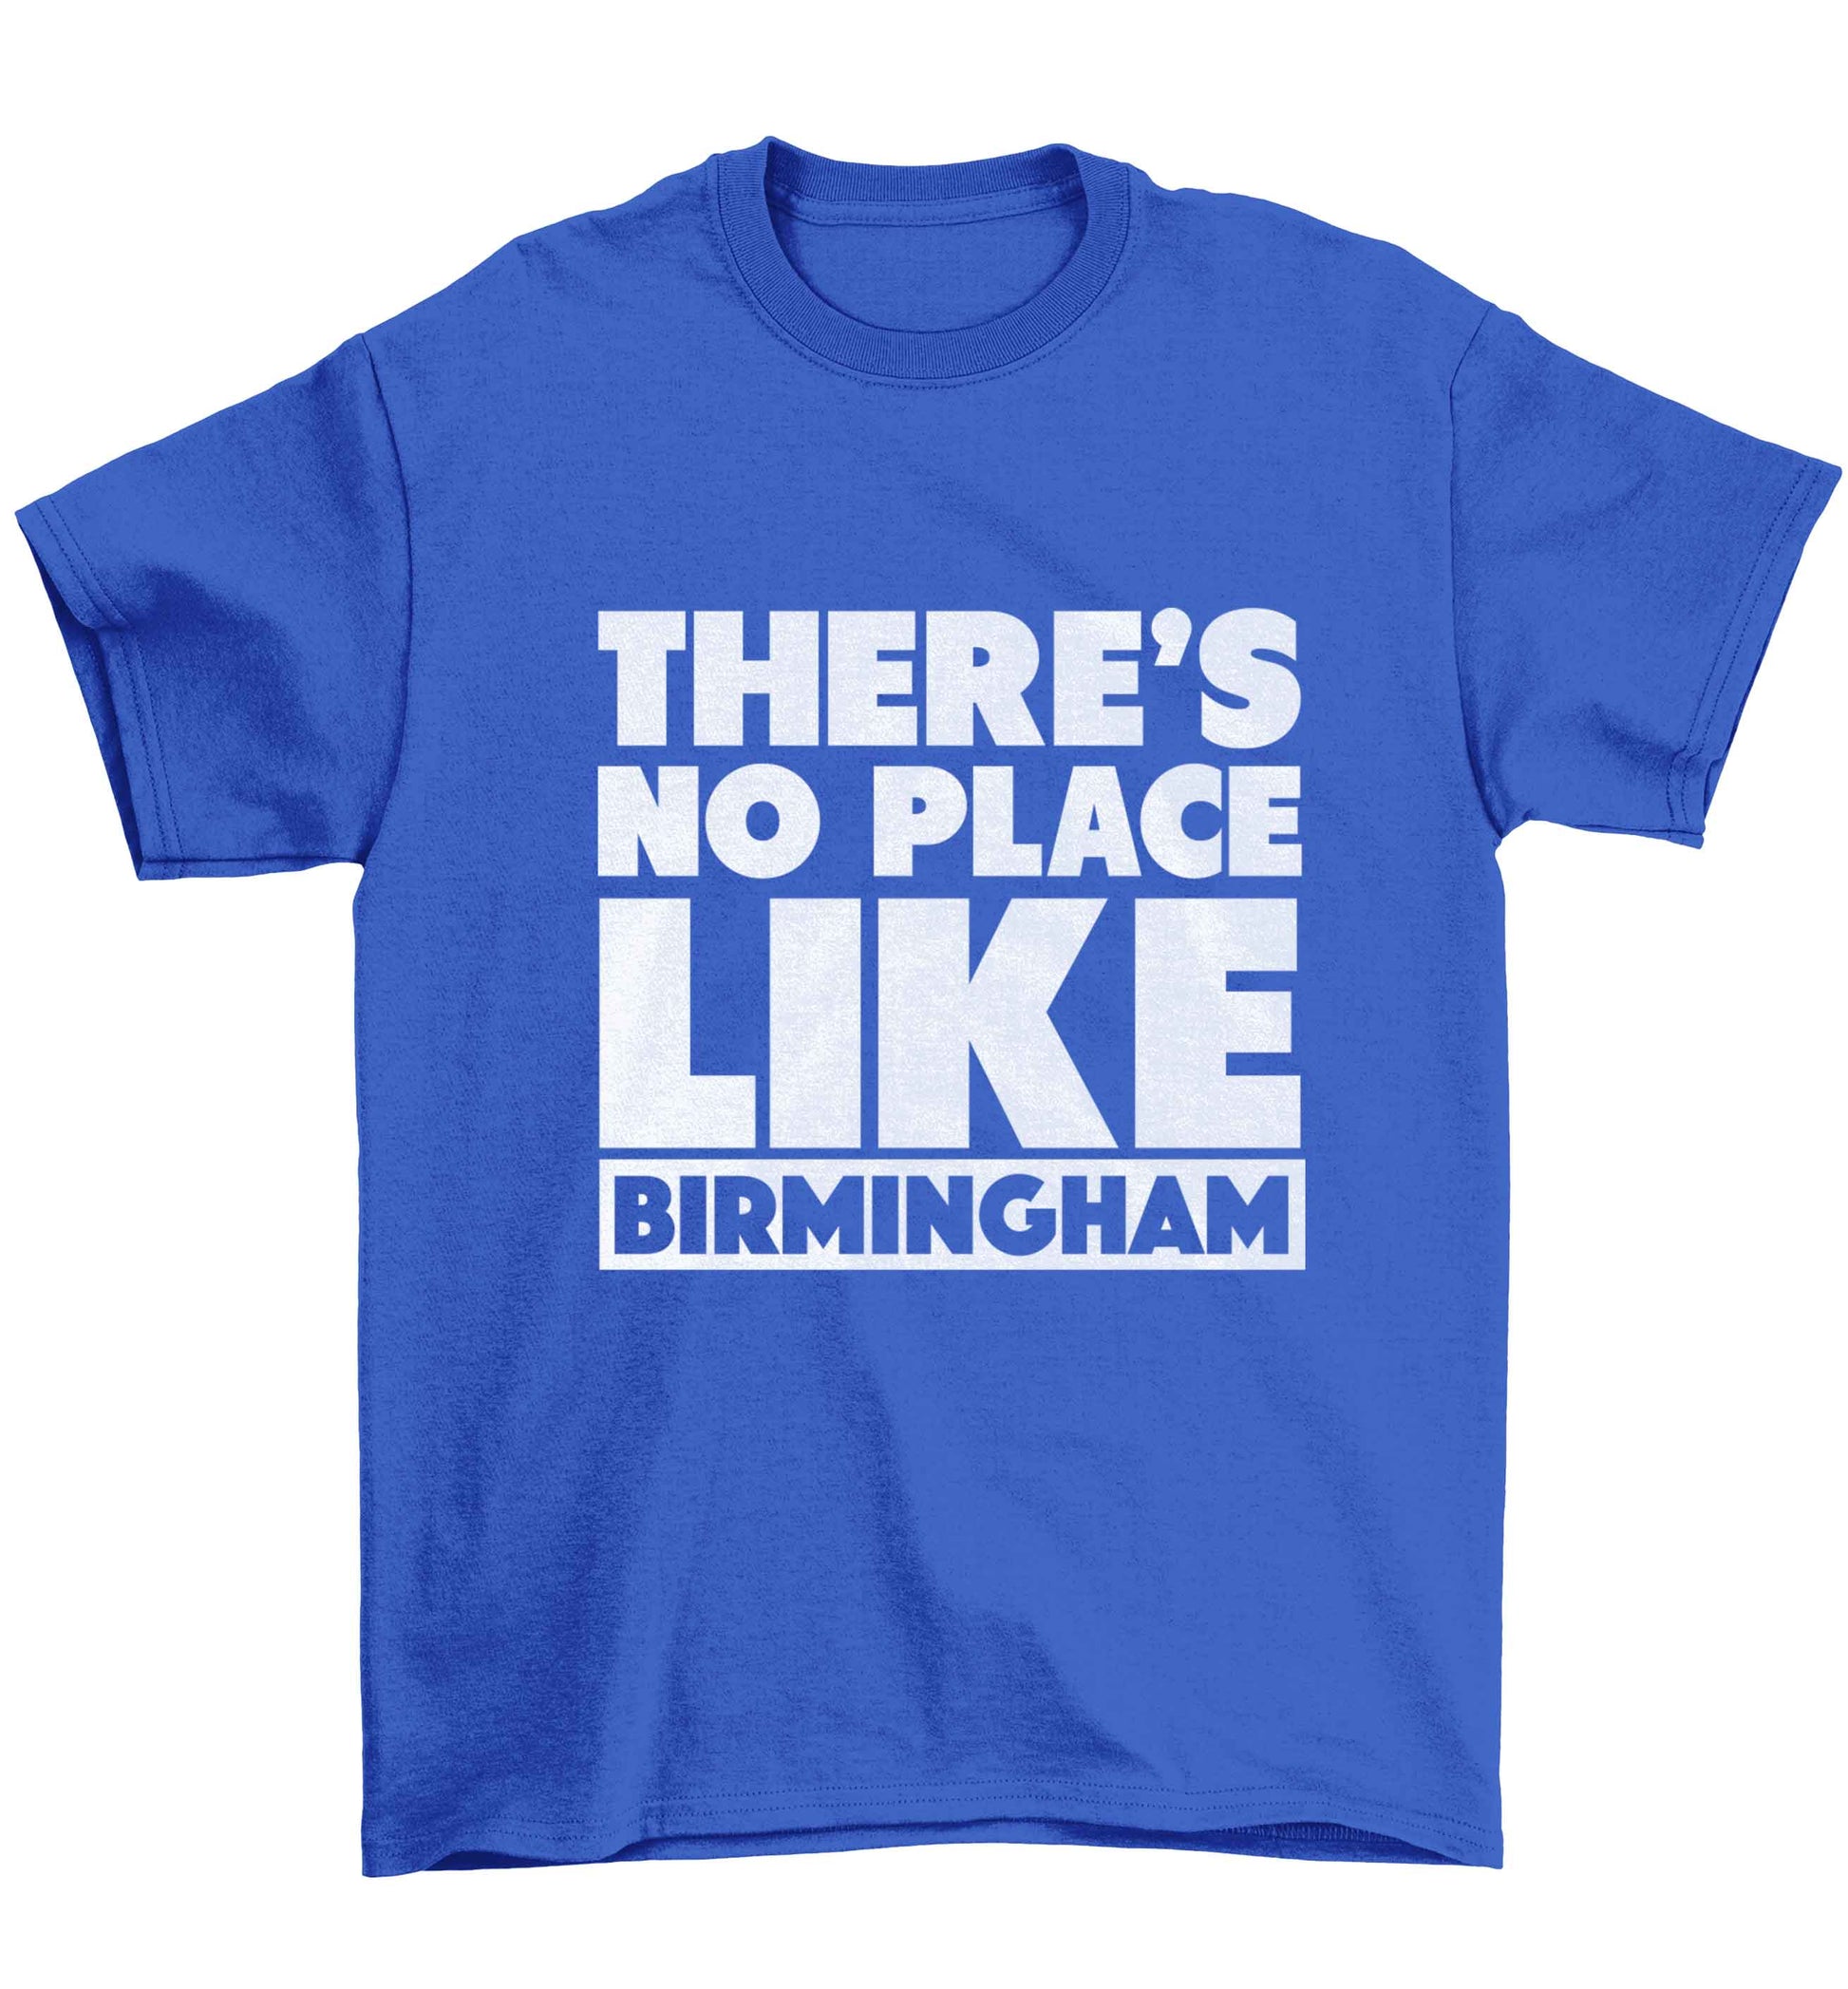 There's no place like Birmingham Children's blue Tshirt 12-13 Years